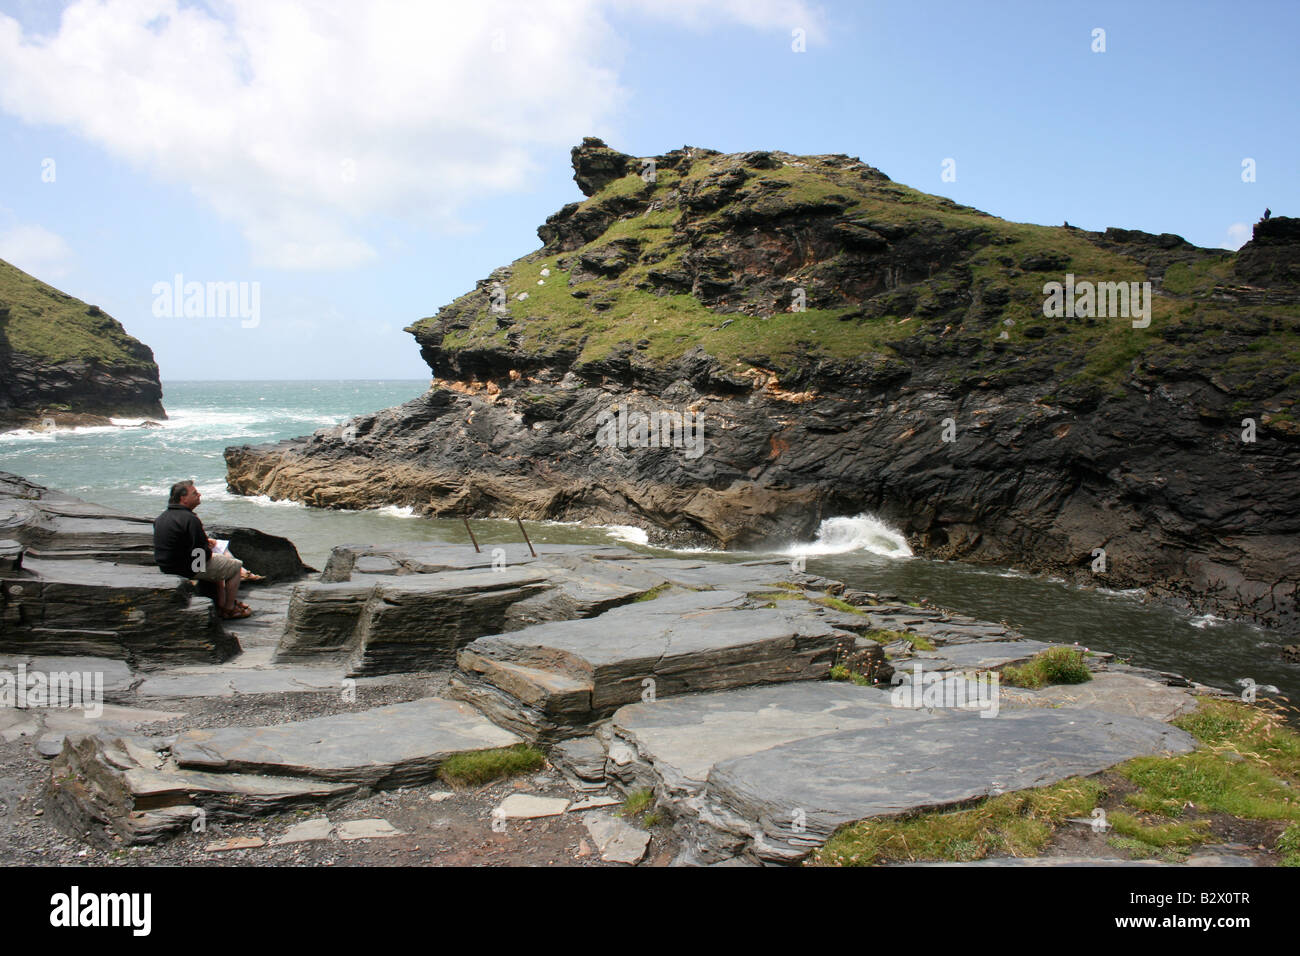 The blowhole at Penally Point at Boscastle, Cornwall, England Stock Photo